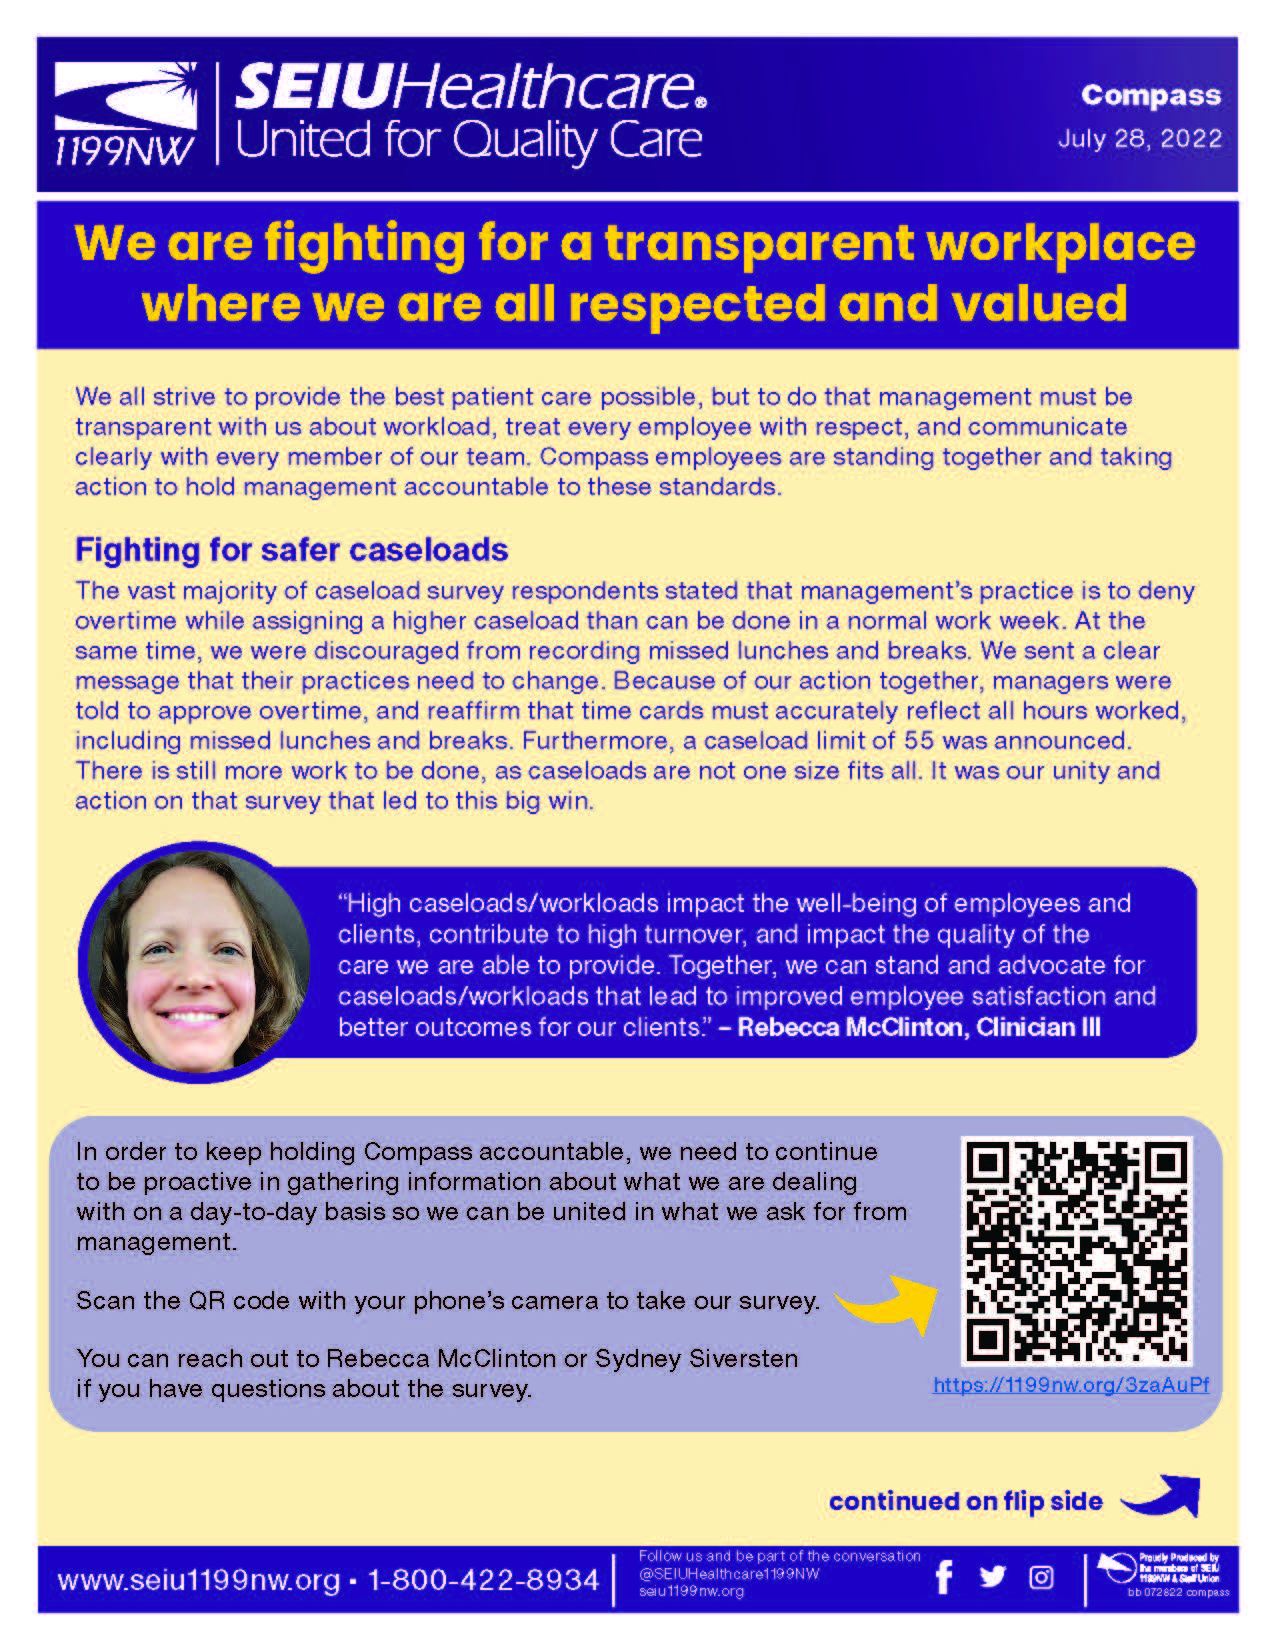 We are fighting for a transparent workplace where we are all respected and valued